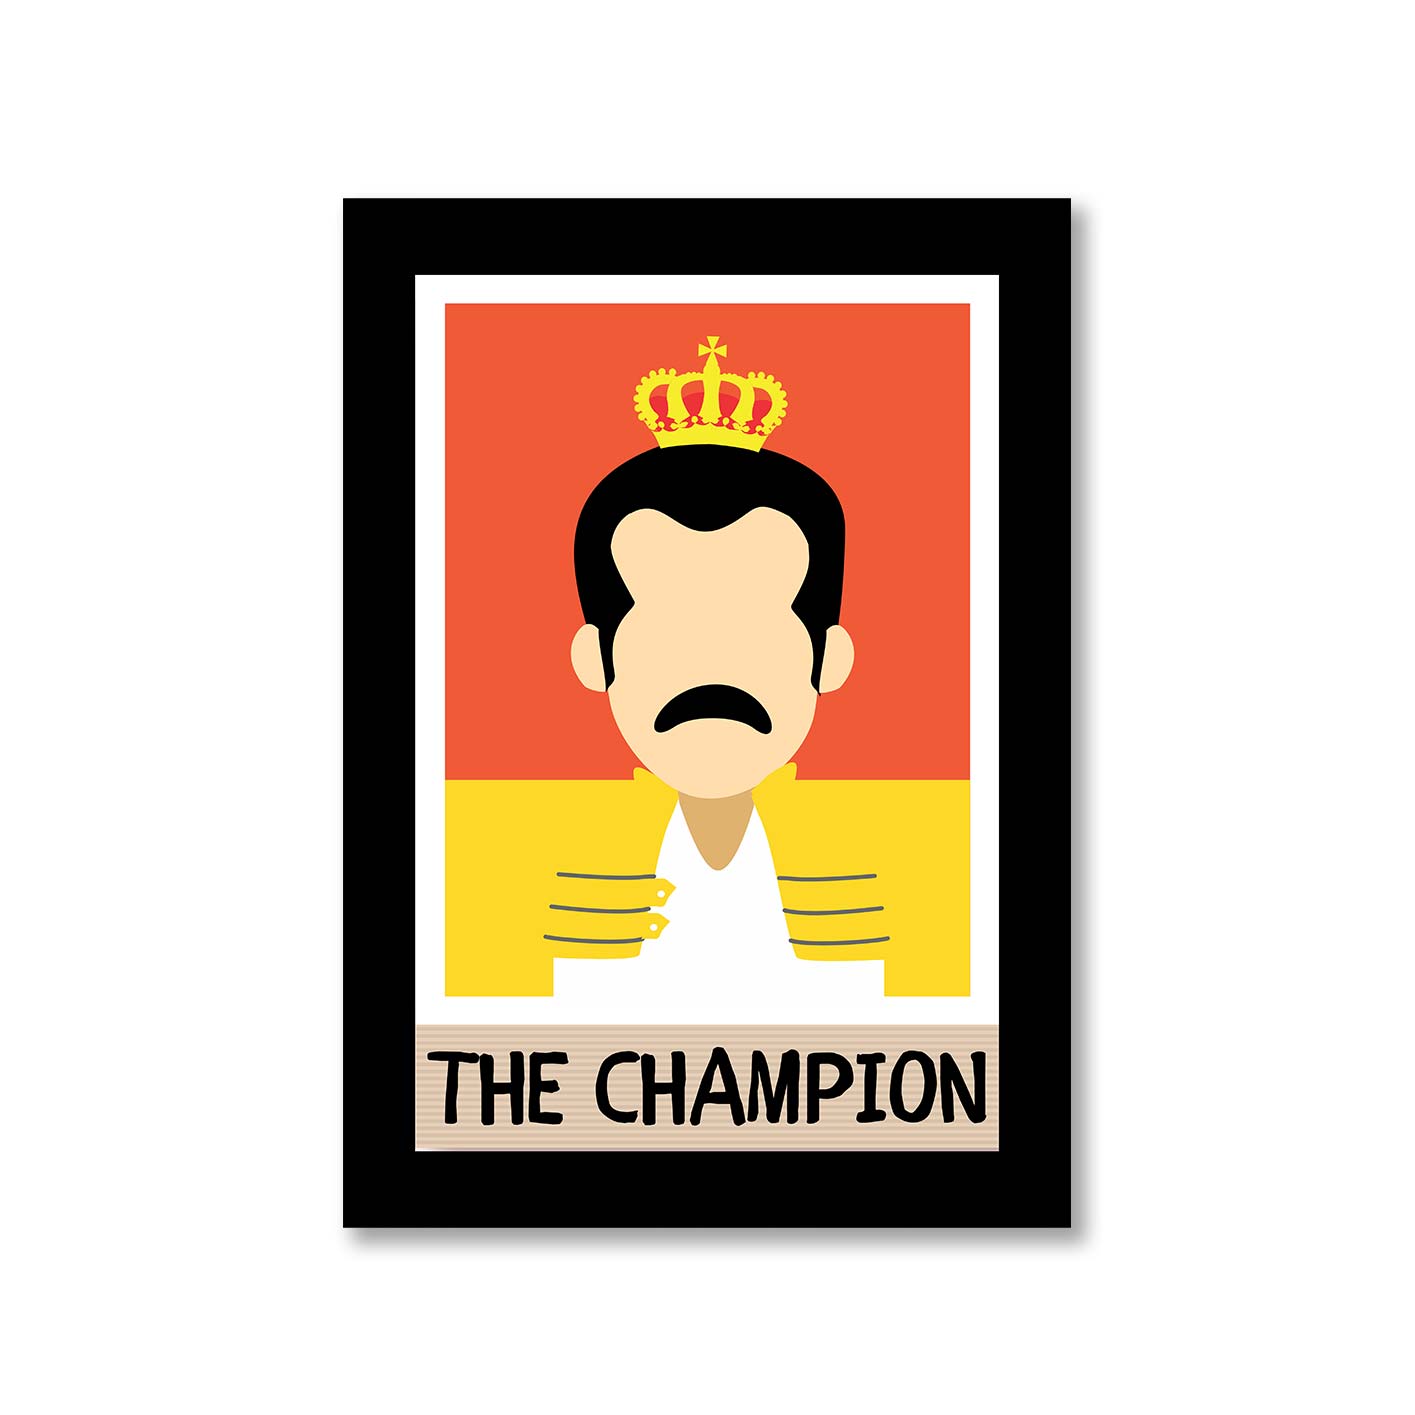 queen the champion poster wall art buy online united states of america usa the banyan tee tbt a4